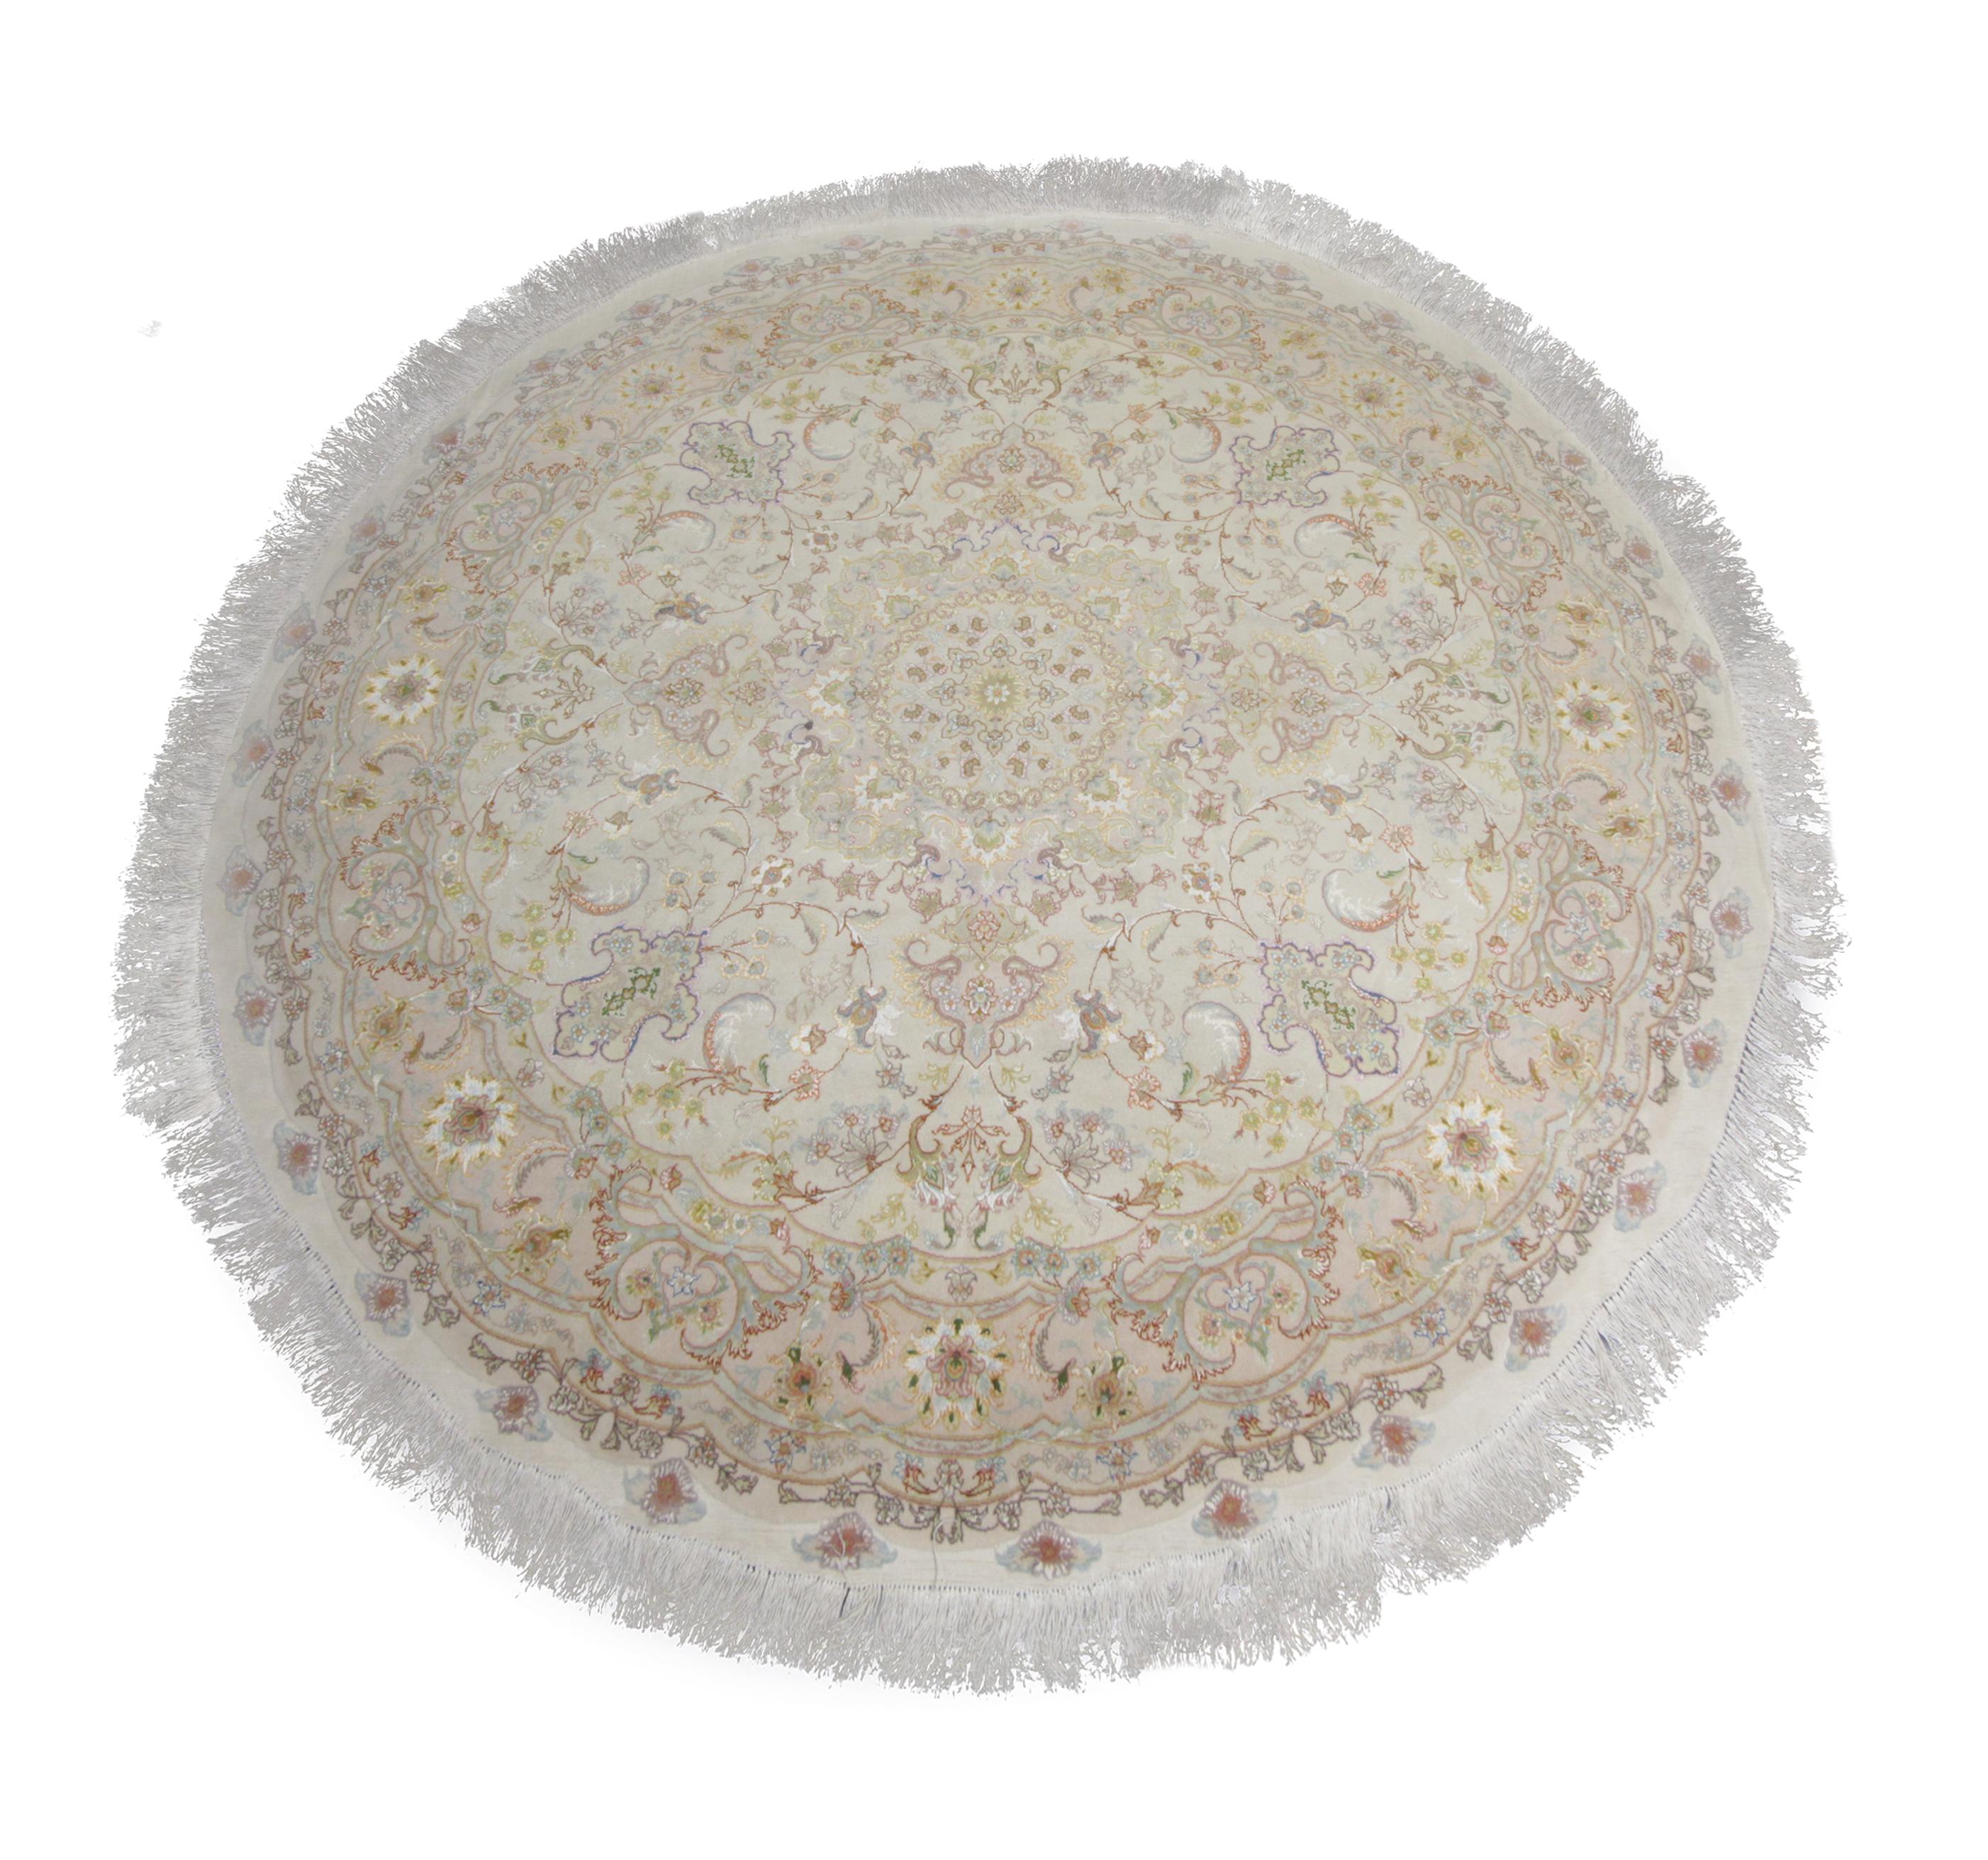 This small circular wool rug was woven by hand in Turkey in the early 2000s with fine organic materials. The design features a cream background with accents of pink, ivory, blue and green that make up the intricate symmetrical medallion design. This